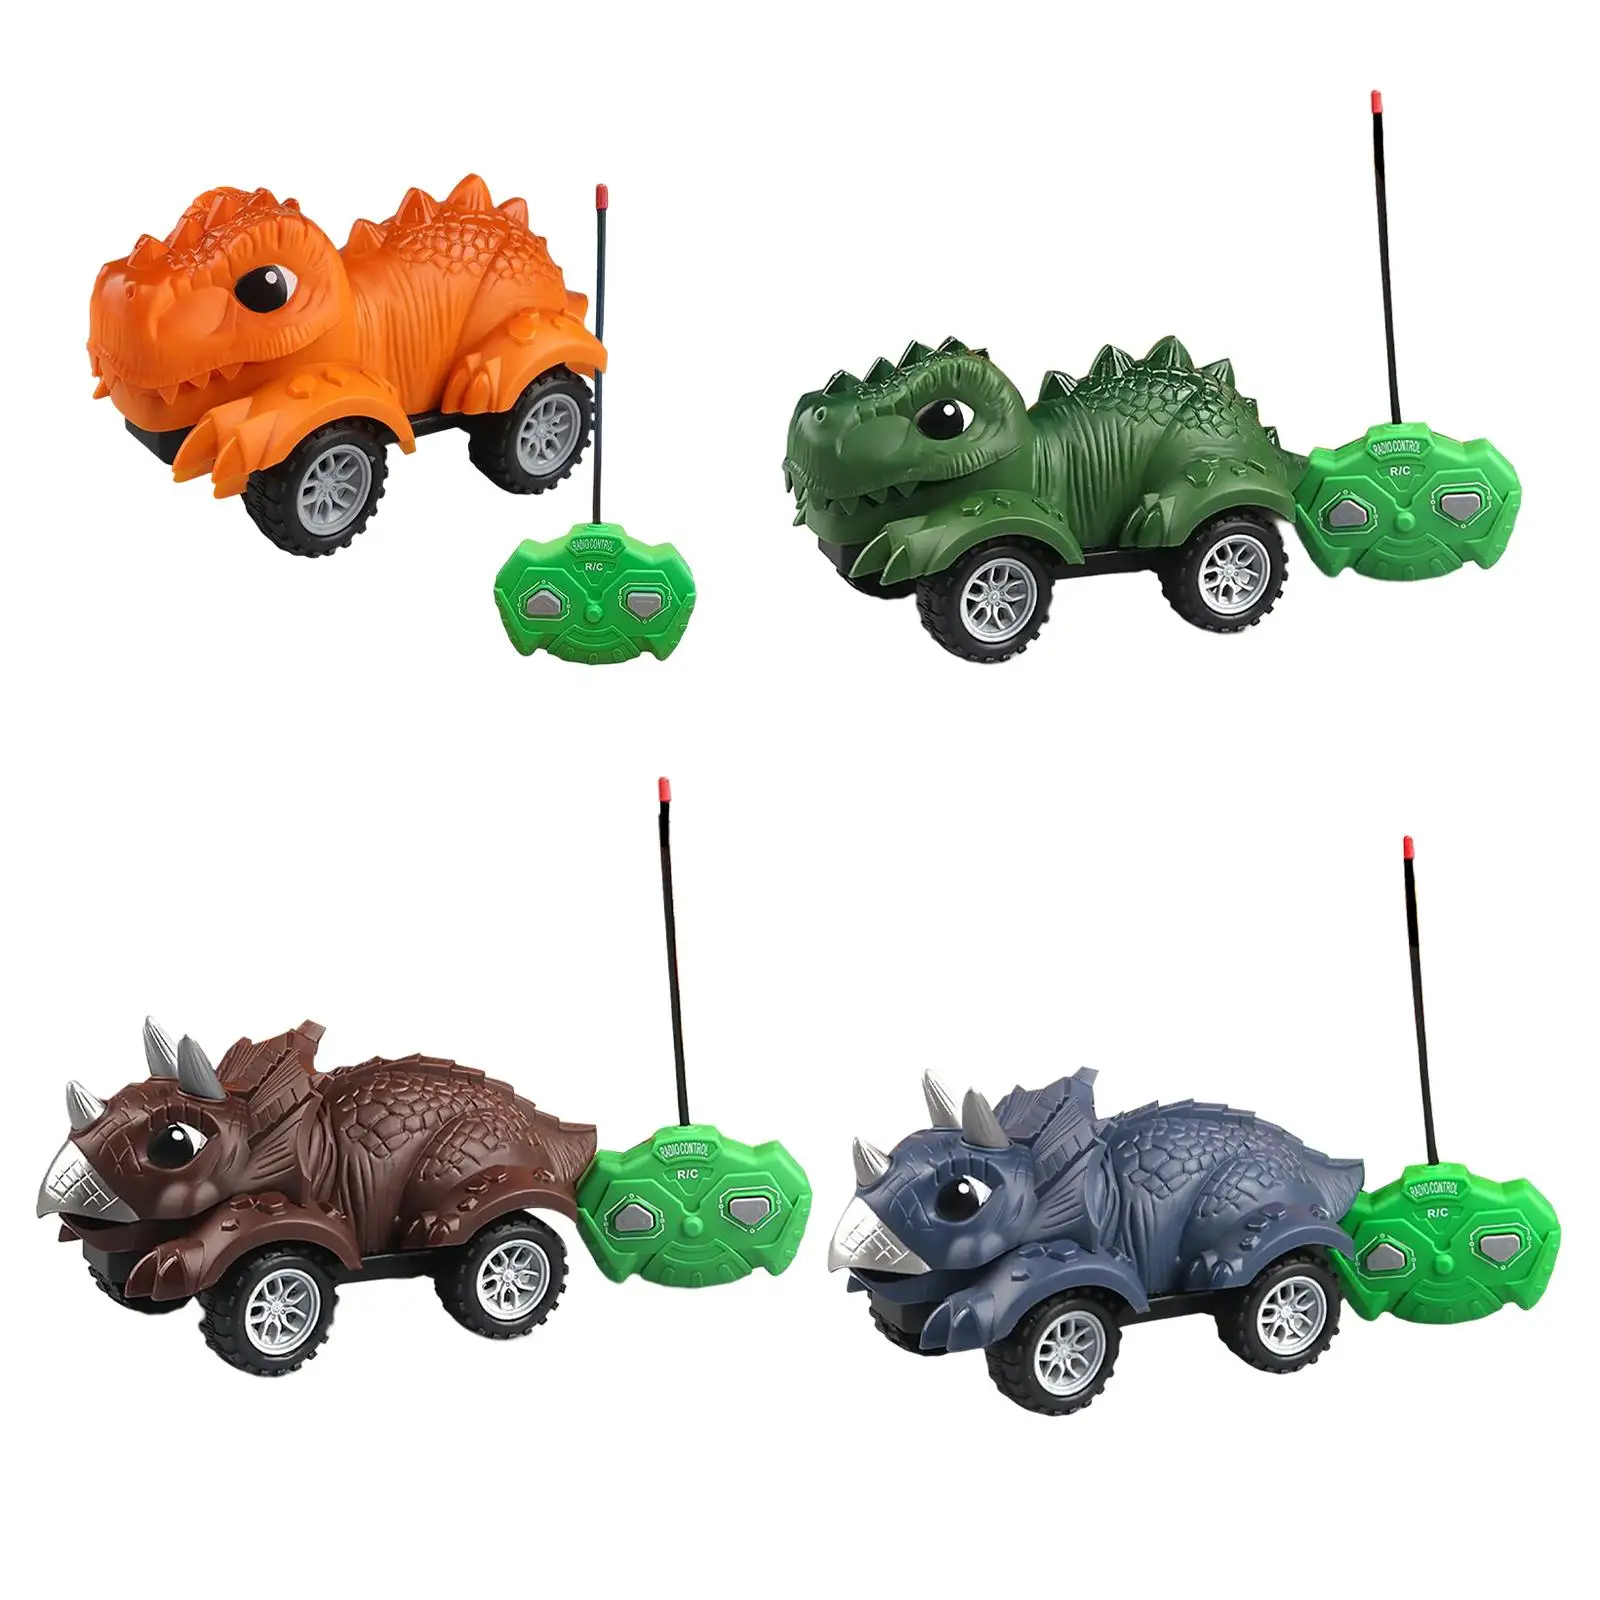 Fun Dinosaur Toy Car Learning Educational Toys Battery Operated Toy Vehicle Toy Car for Christmas Gifts Party Favors Boys Kids